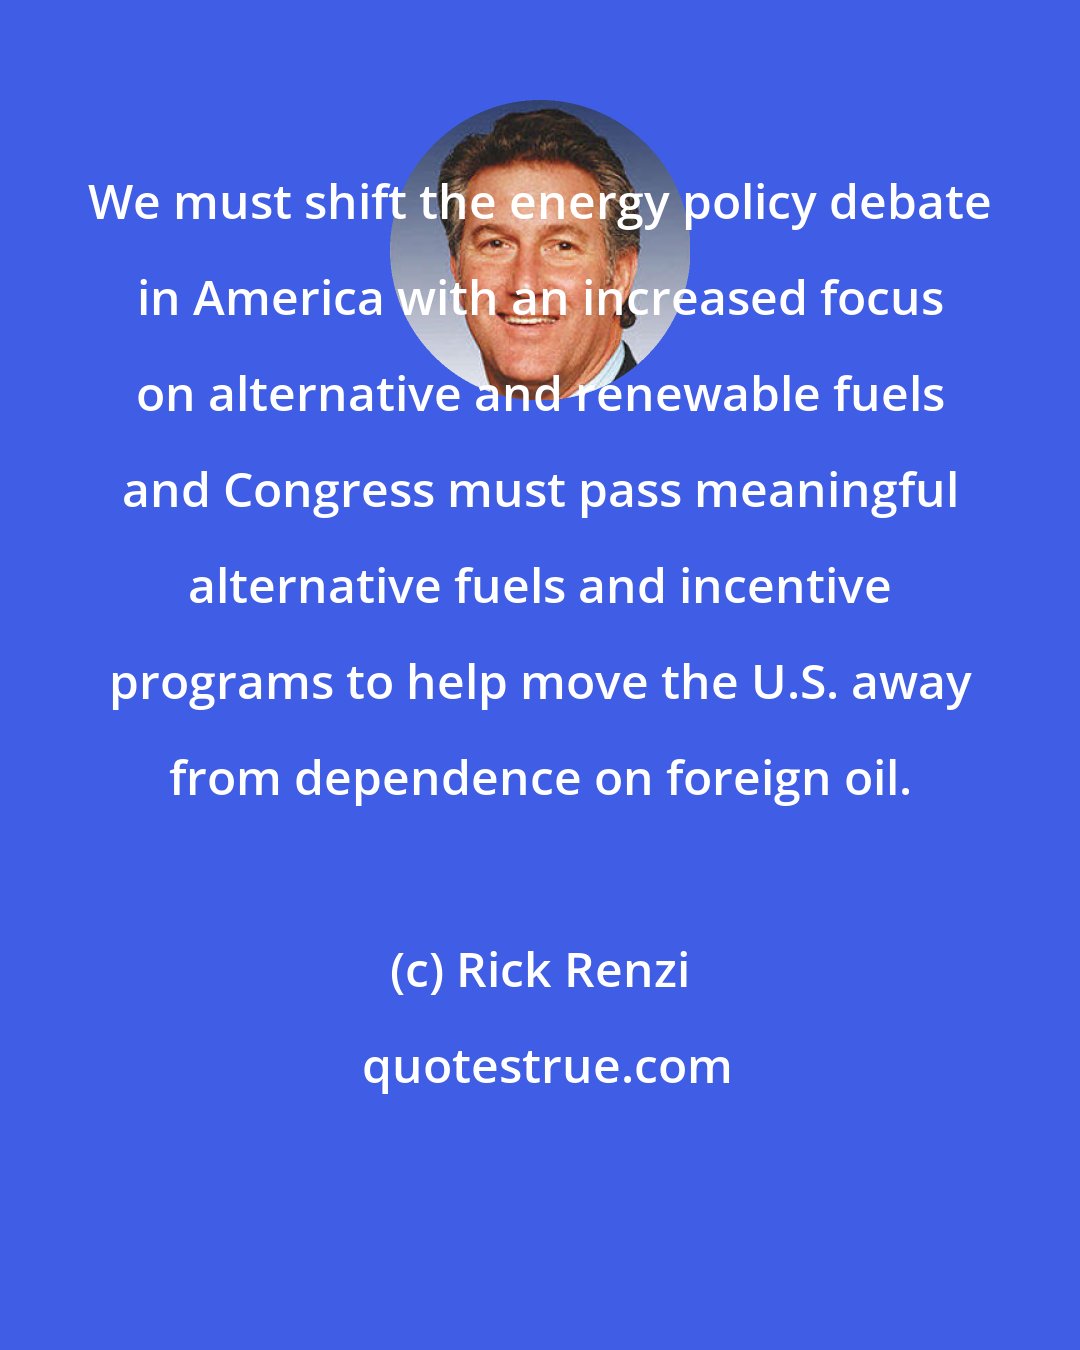 Rick Renzi: We must shift the energy policy debate in America with an increased focus on alternative and renewable fuels and Congress must pass meaningful alternative fuels and incentive programs to help move the U.S. away from dependence on foreign oil.